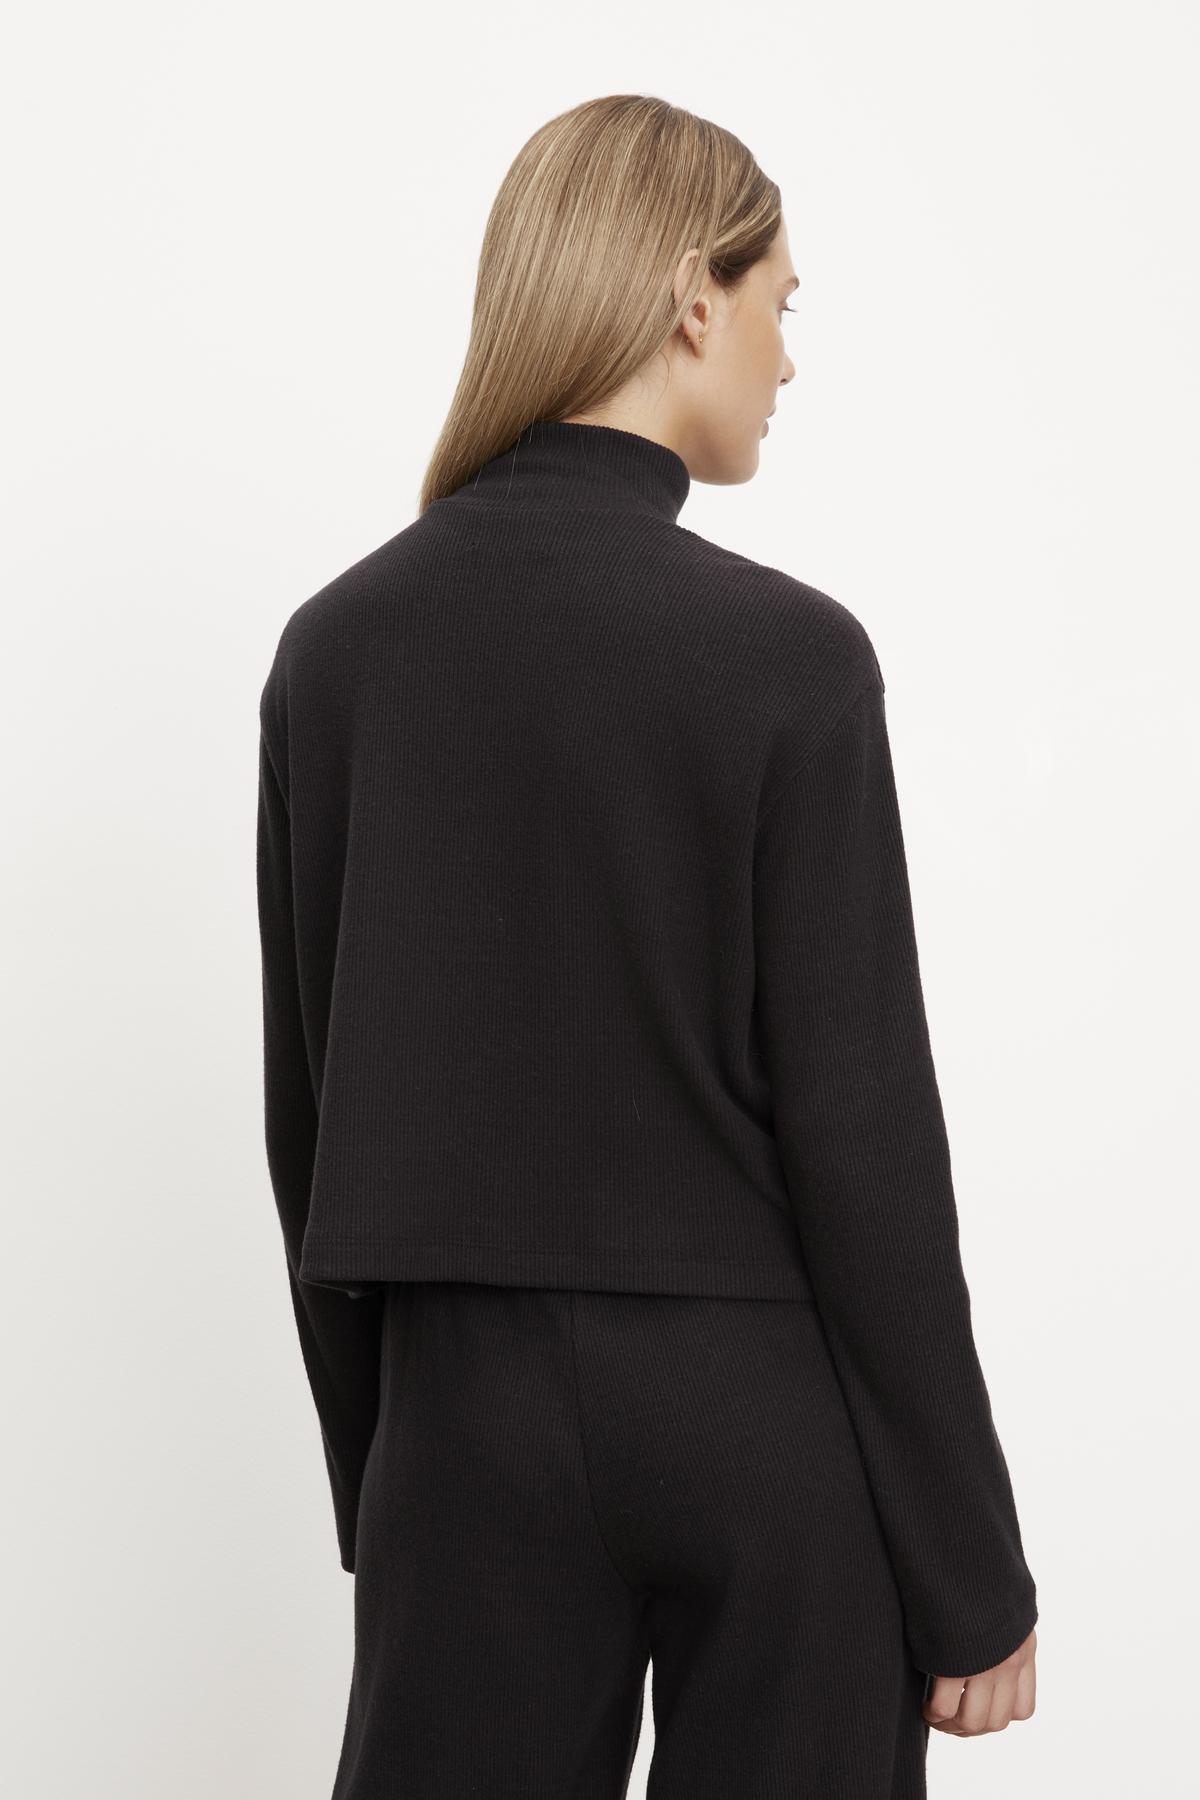 The woman is seen from the back wearing a black ALEC BRUSHED RIB MOCK NECK TOP by Velvet by Graham & Spencer.-35701823537345